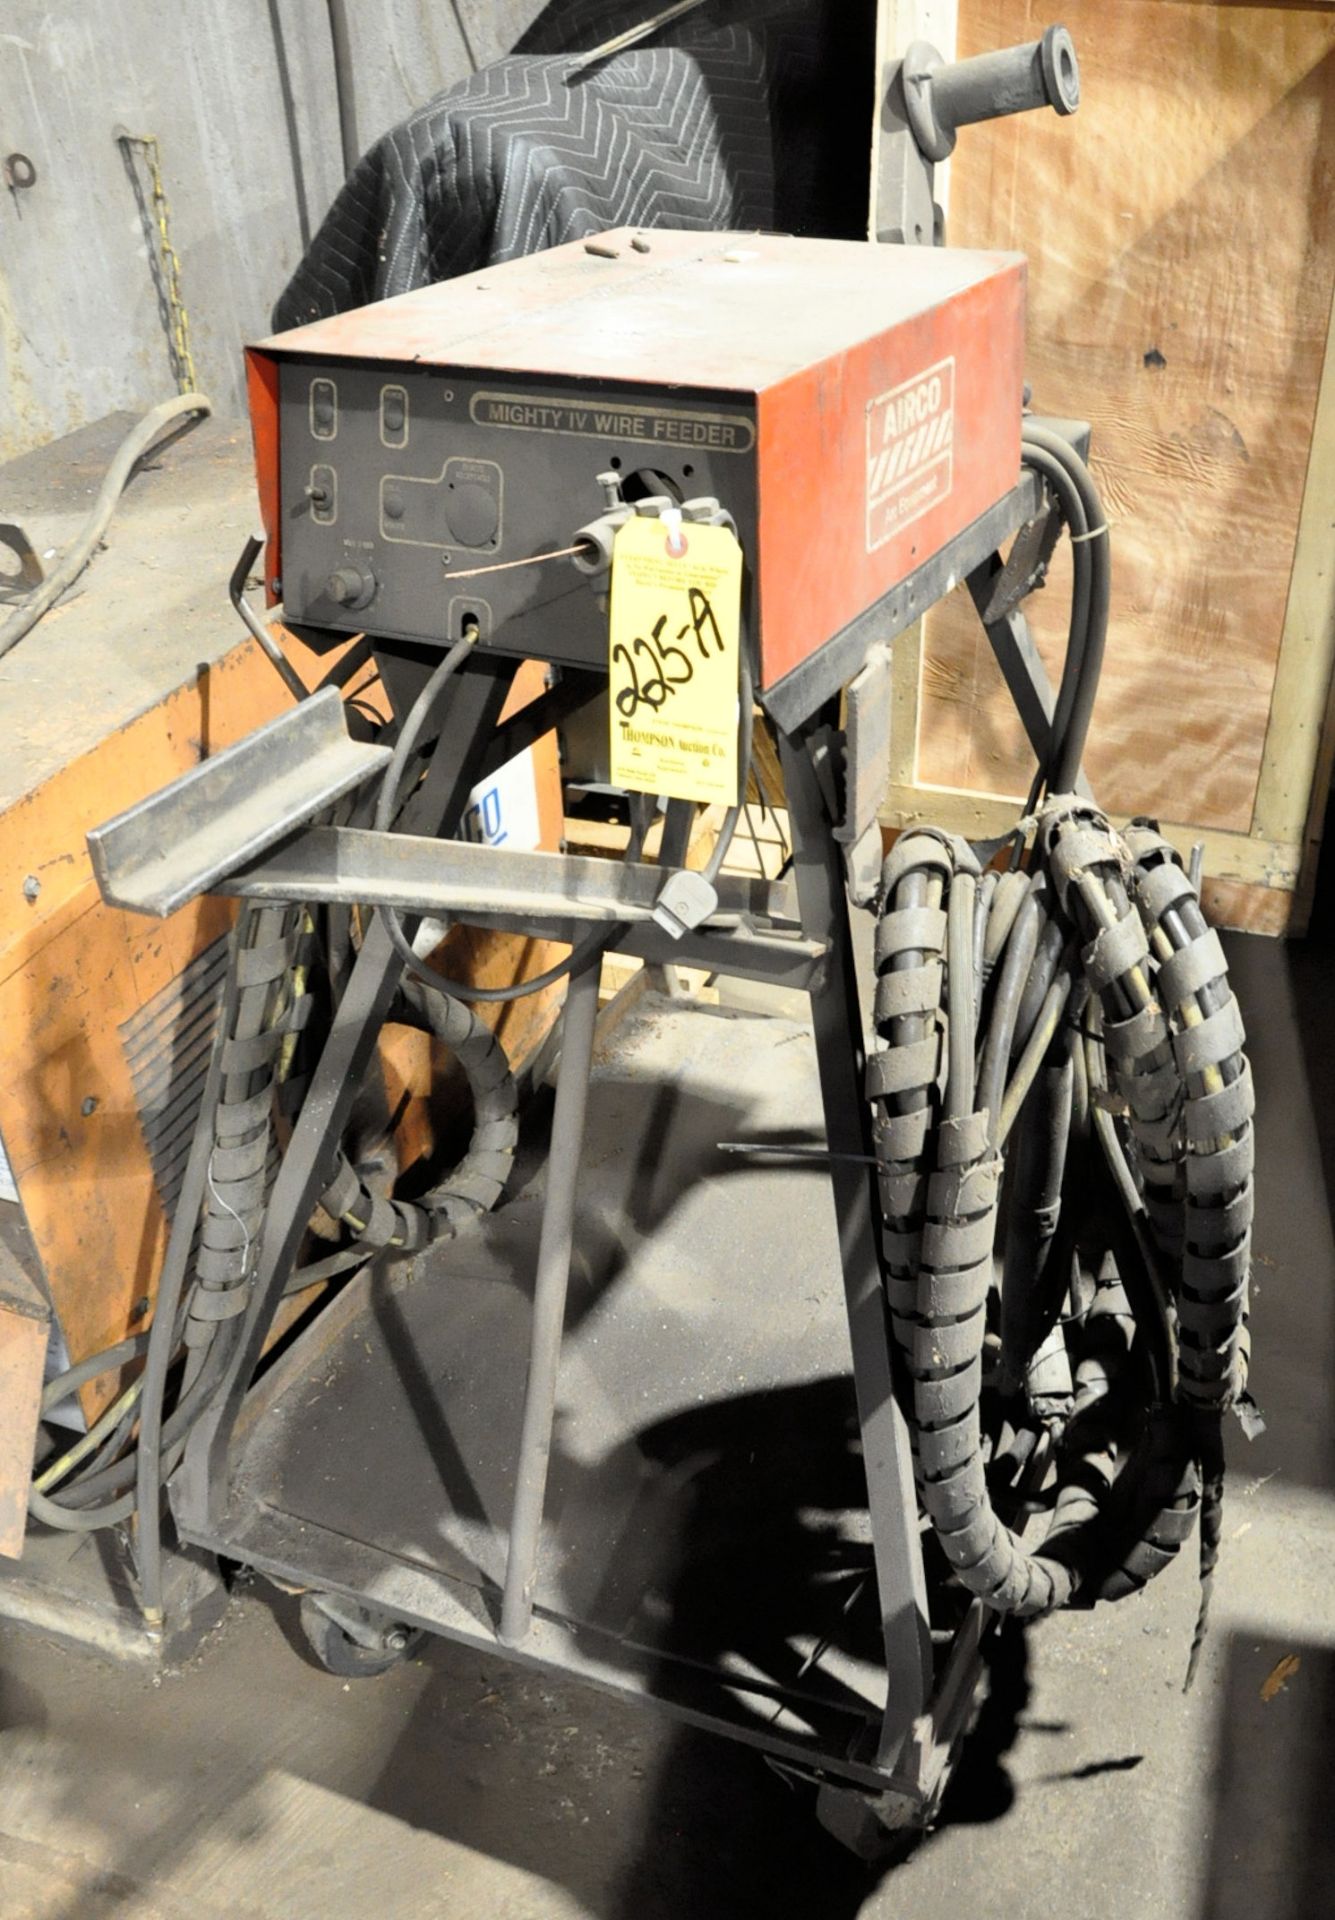 Airco Model CV-450, 450-Amp Capacity CV/DC Arc Welding Power Source, S/n N/a, with Leads, Airco - Image 3 of 5